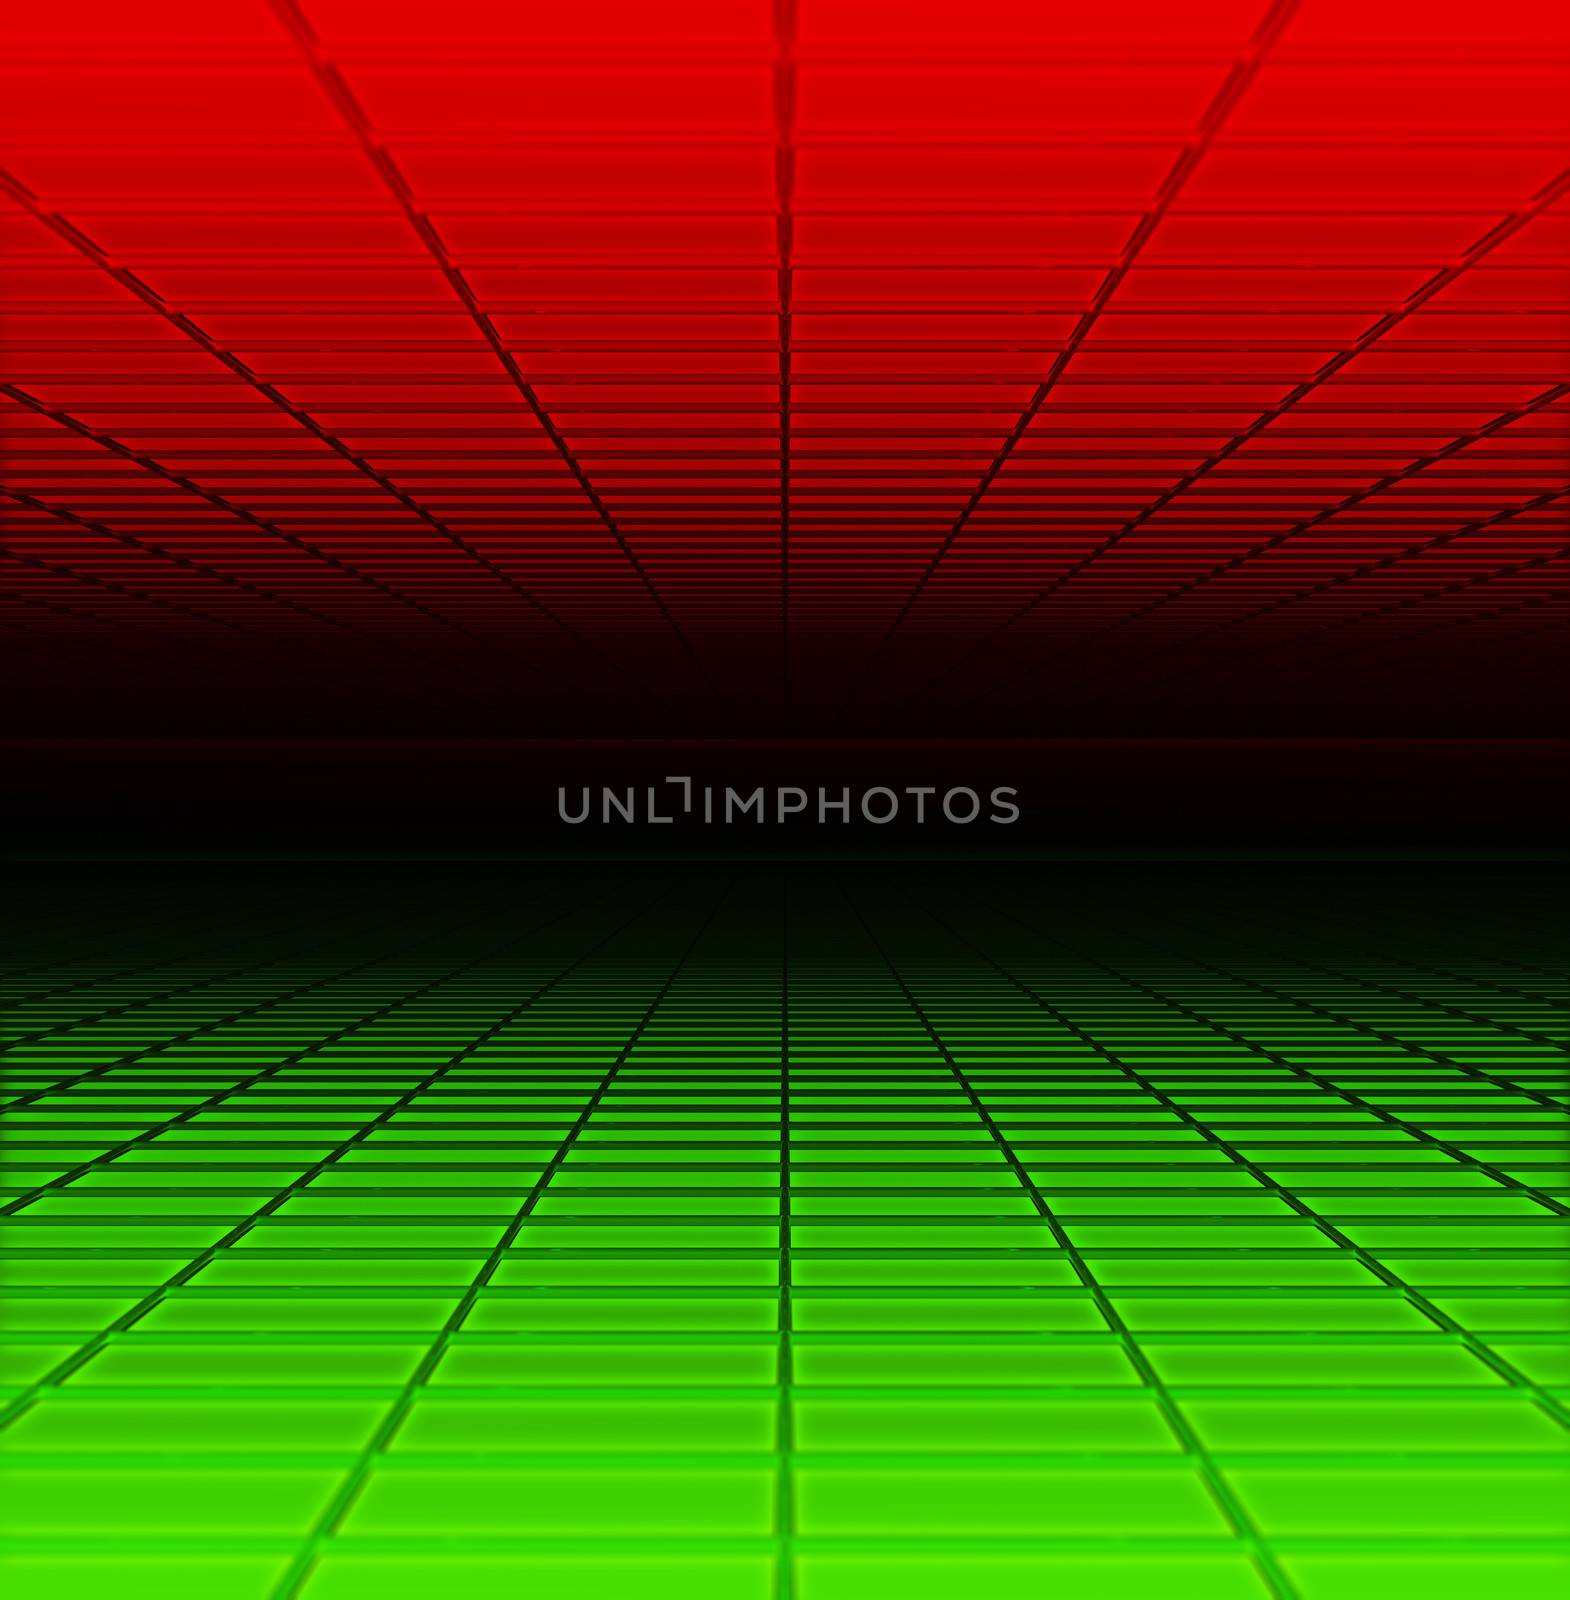 Grid of space in the pigeon Colors (3d images)